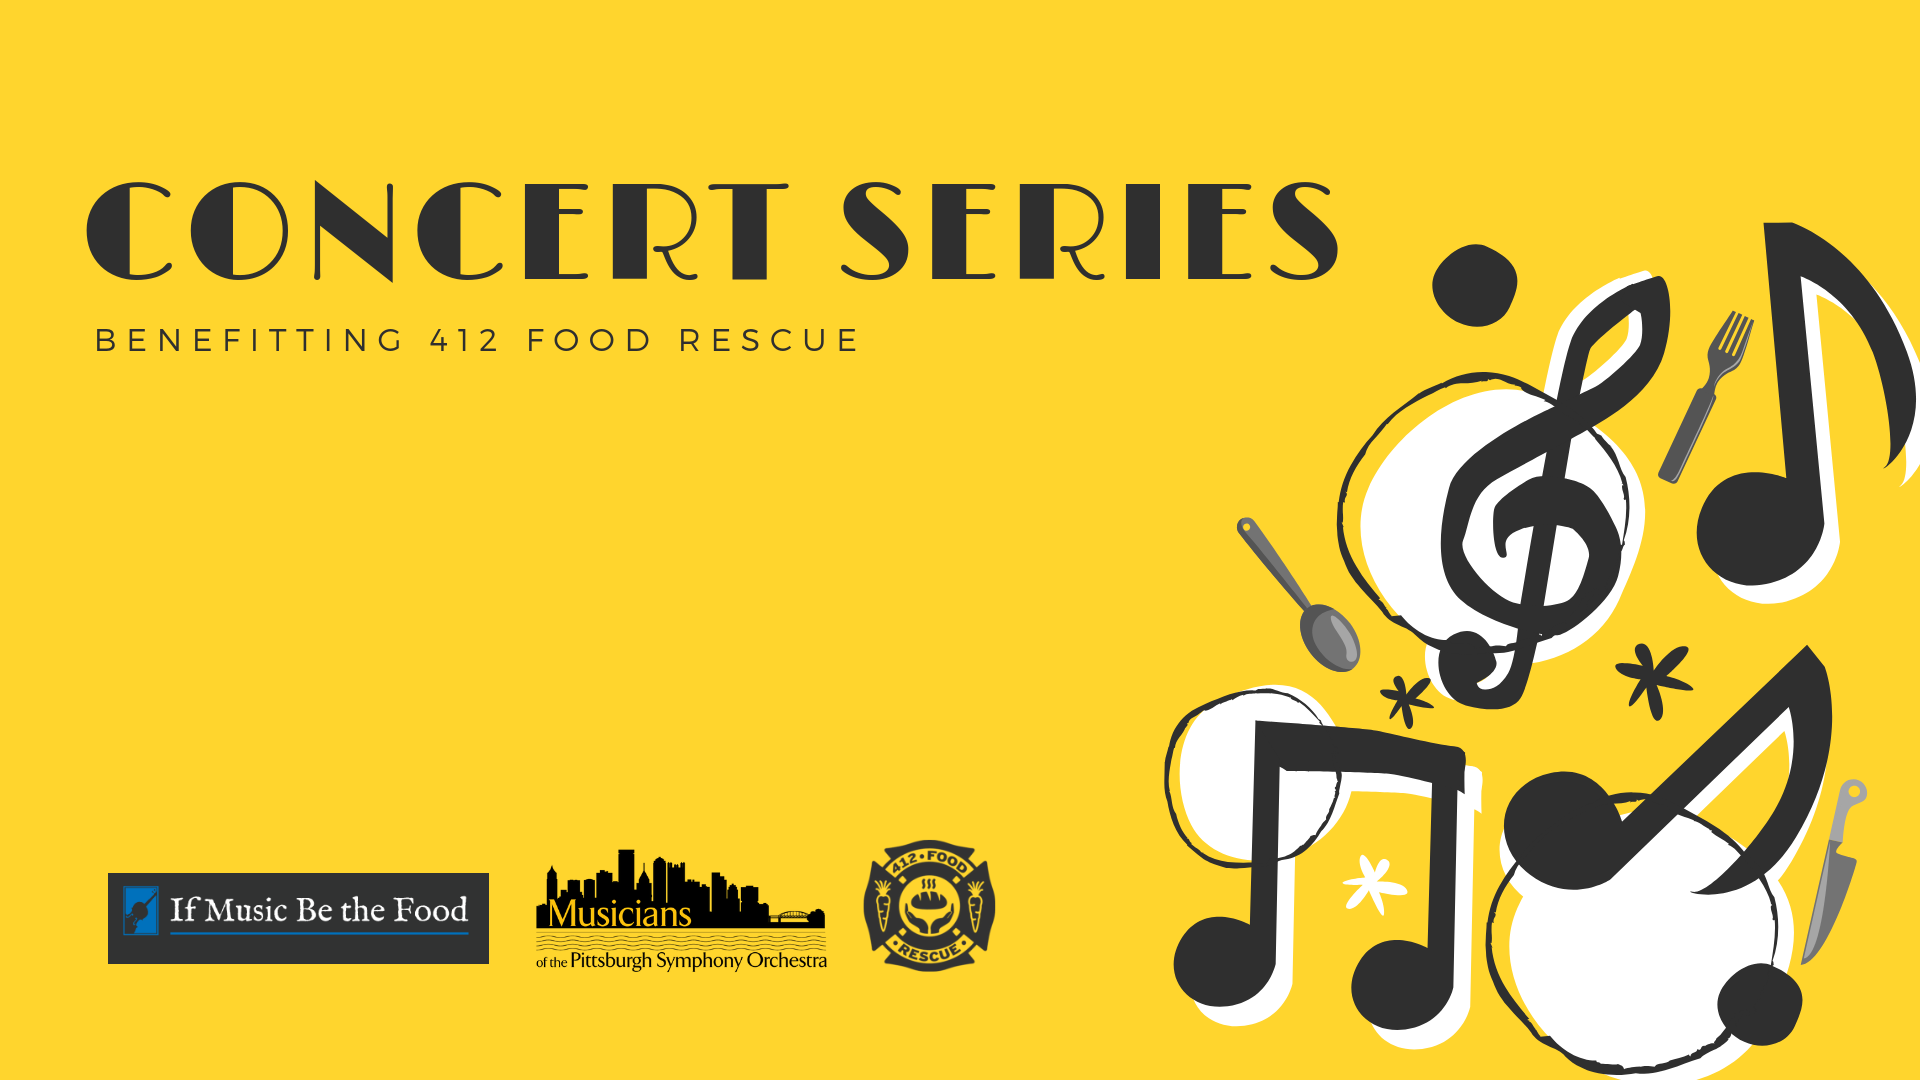 Concert Series presented by Musicians of Steel